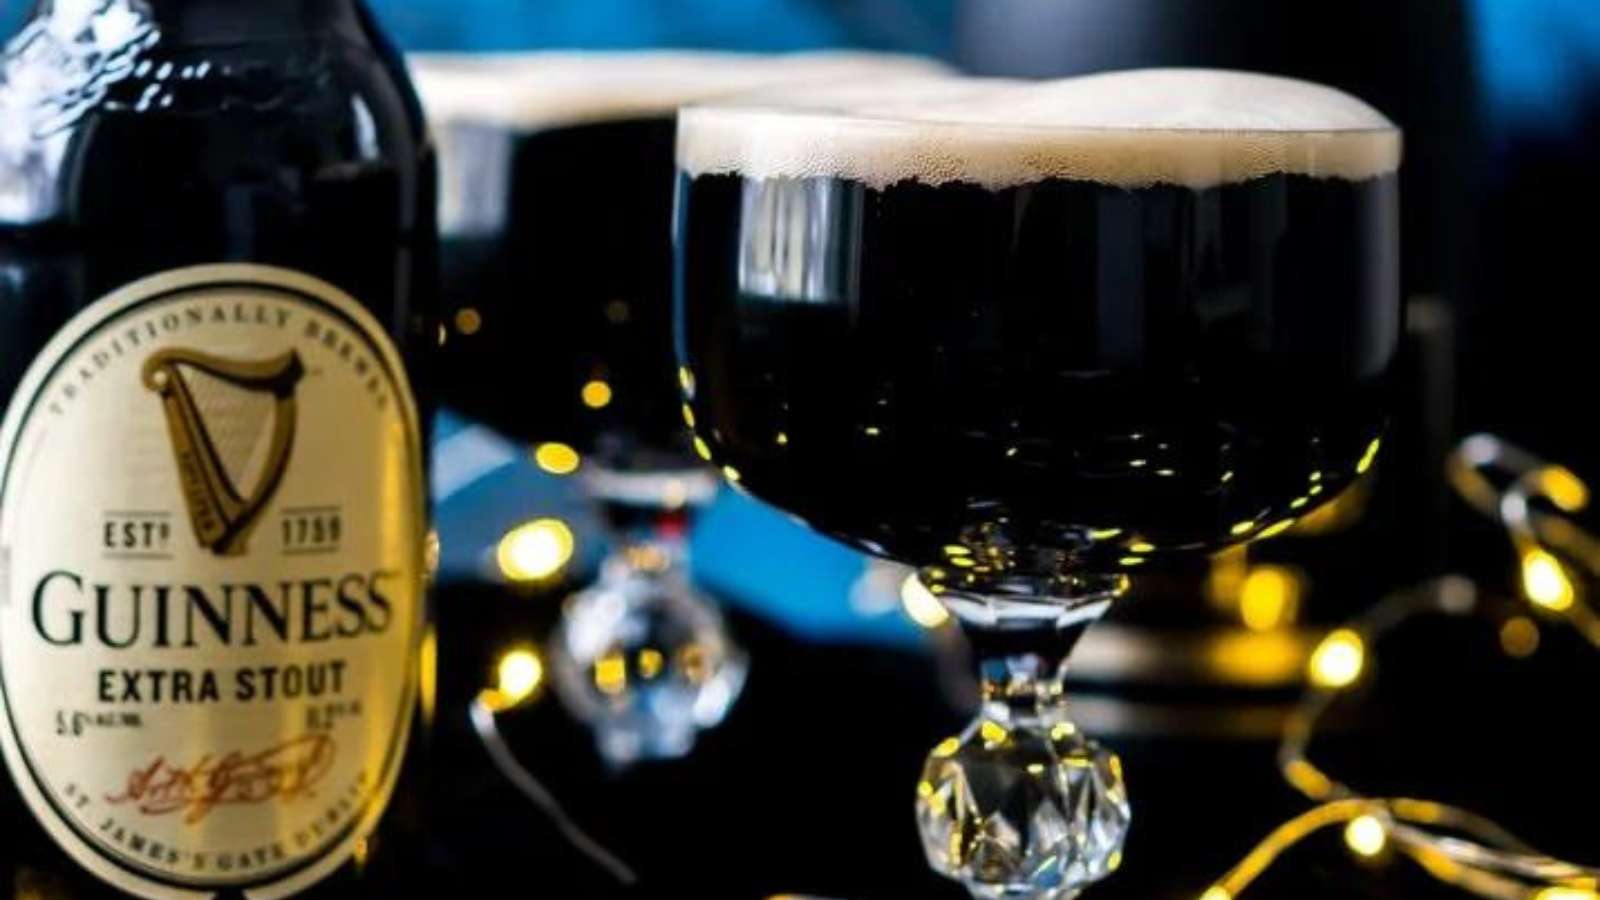 A recipe made with guinness beer - two glasses and a bottle of beer.